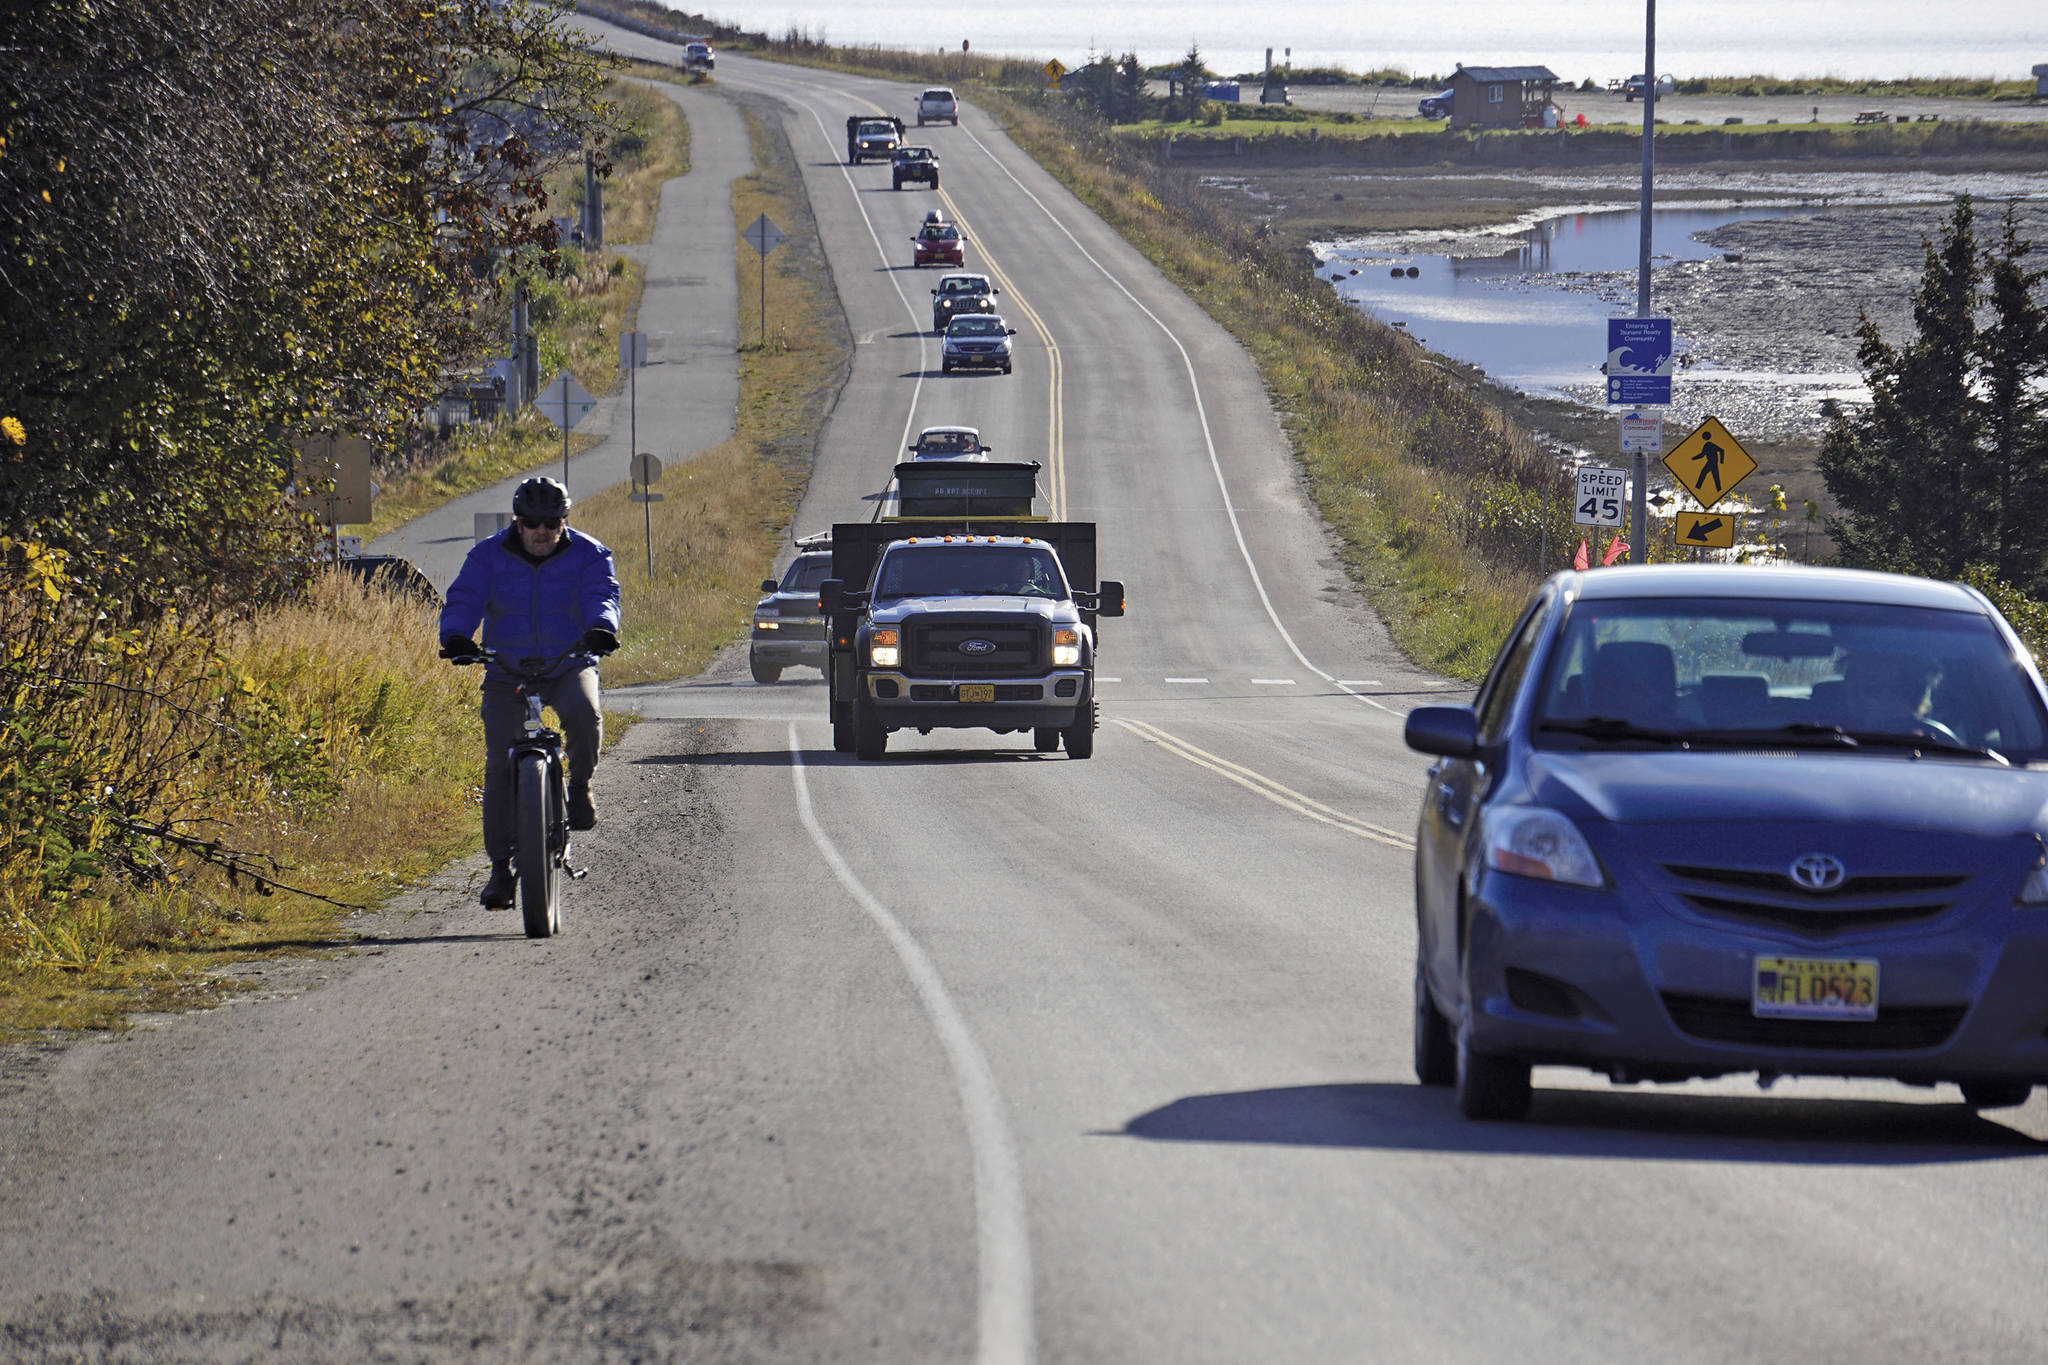 A biker leads a line of cars driving off the Homer Spit at about on Monday, Oct. 19, 2020, in Homer, Alaska after a tsunami evacuation order was issued for low-lying areas in Homer. (Michael Armstrong / Homer News via AP)